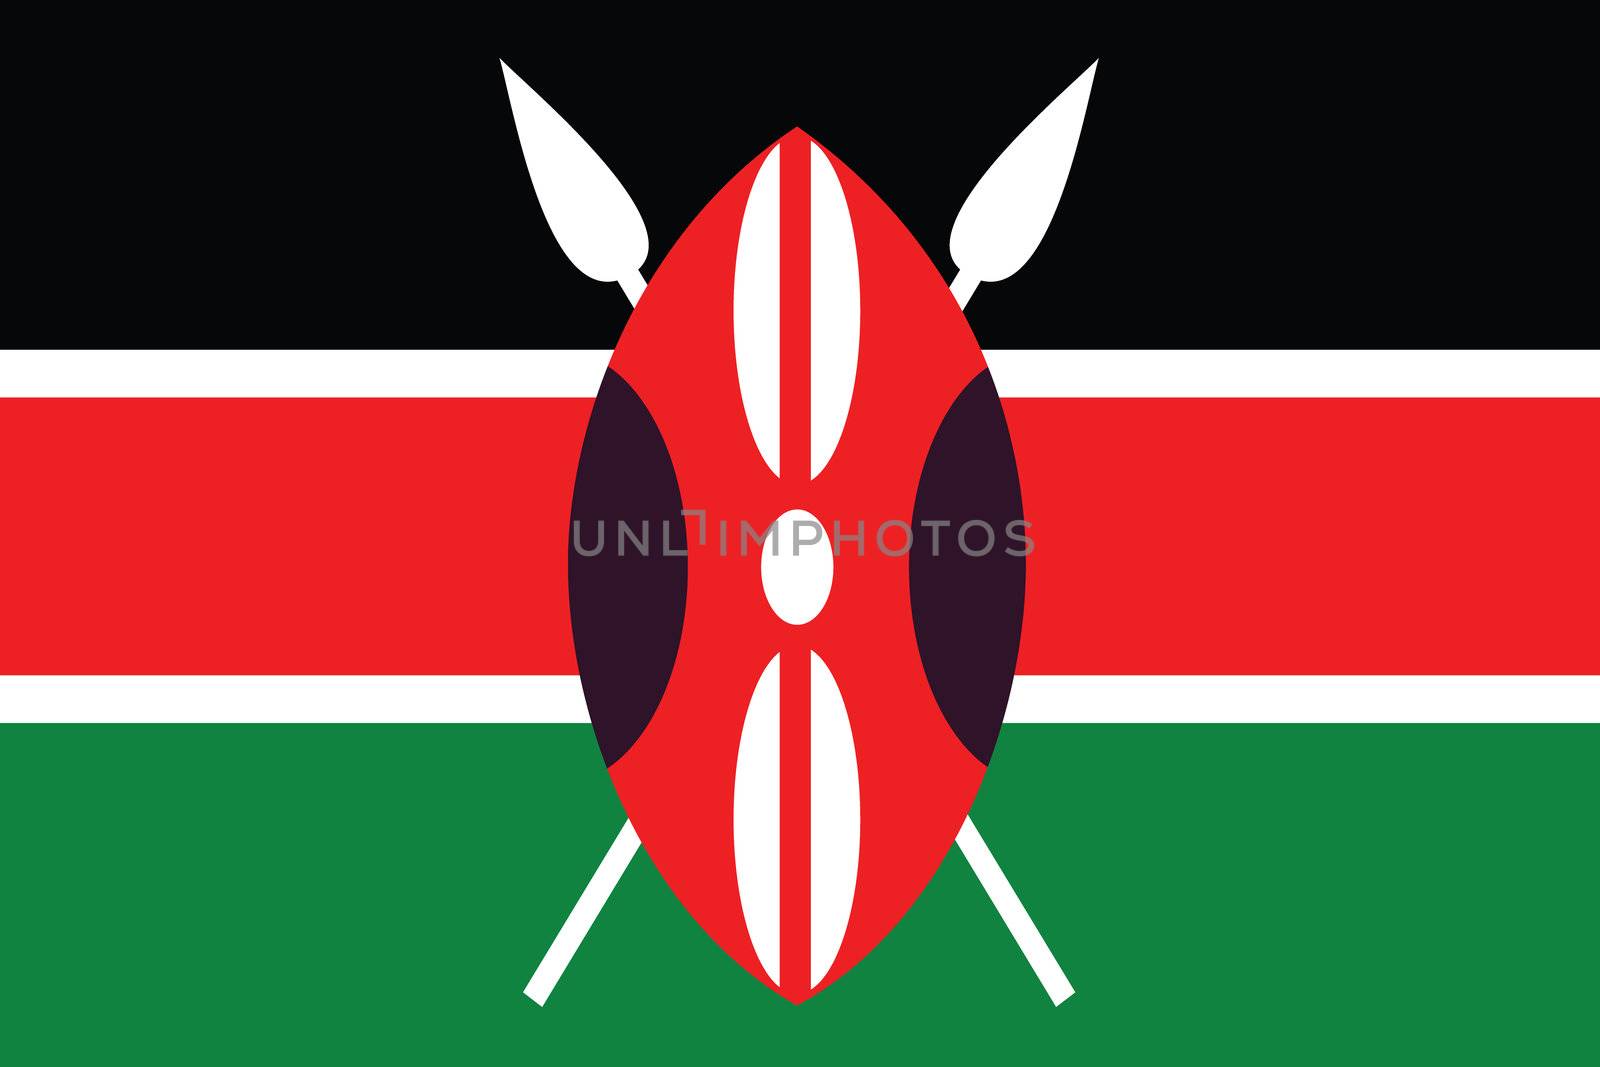 An Illustrated Drawing of the flag of Kenya